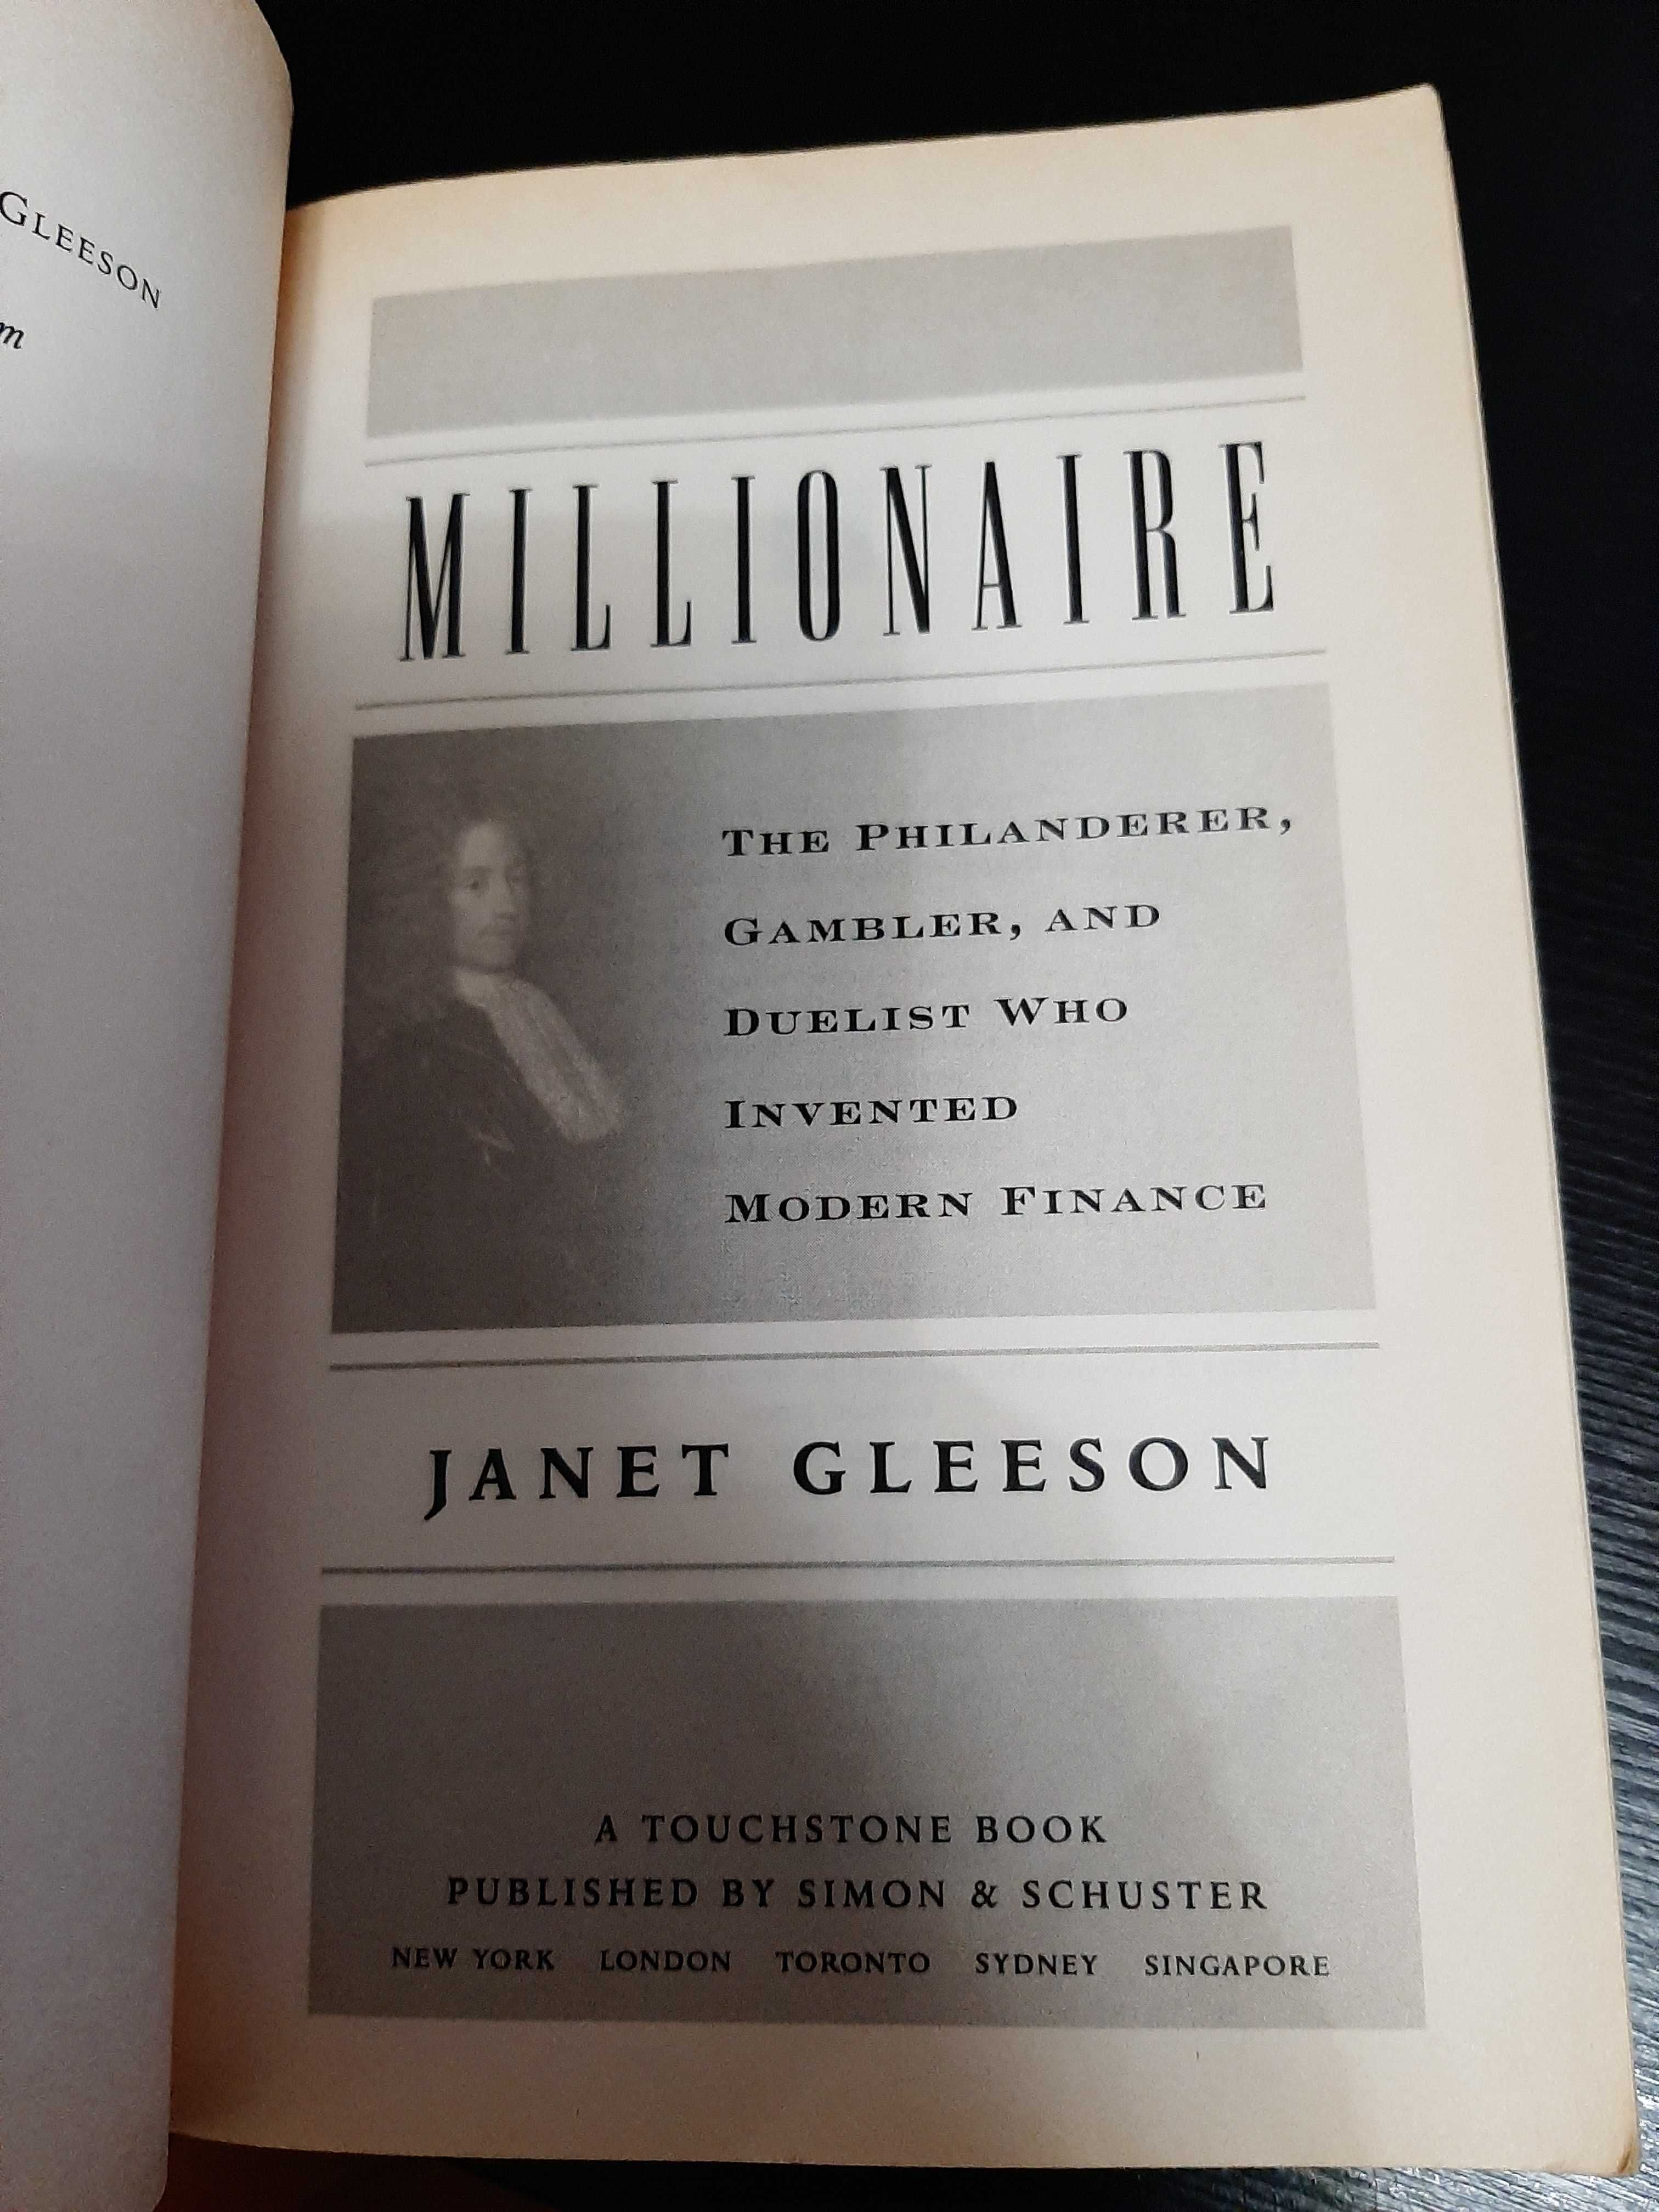 Millionaire: The Philanderer and Gambler who Invented Modern Finance